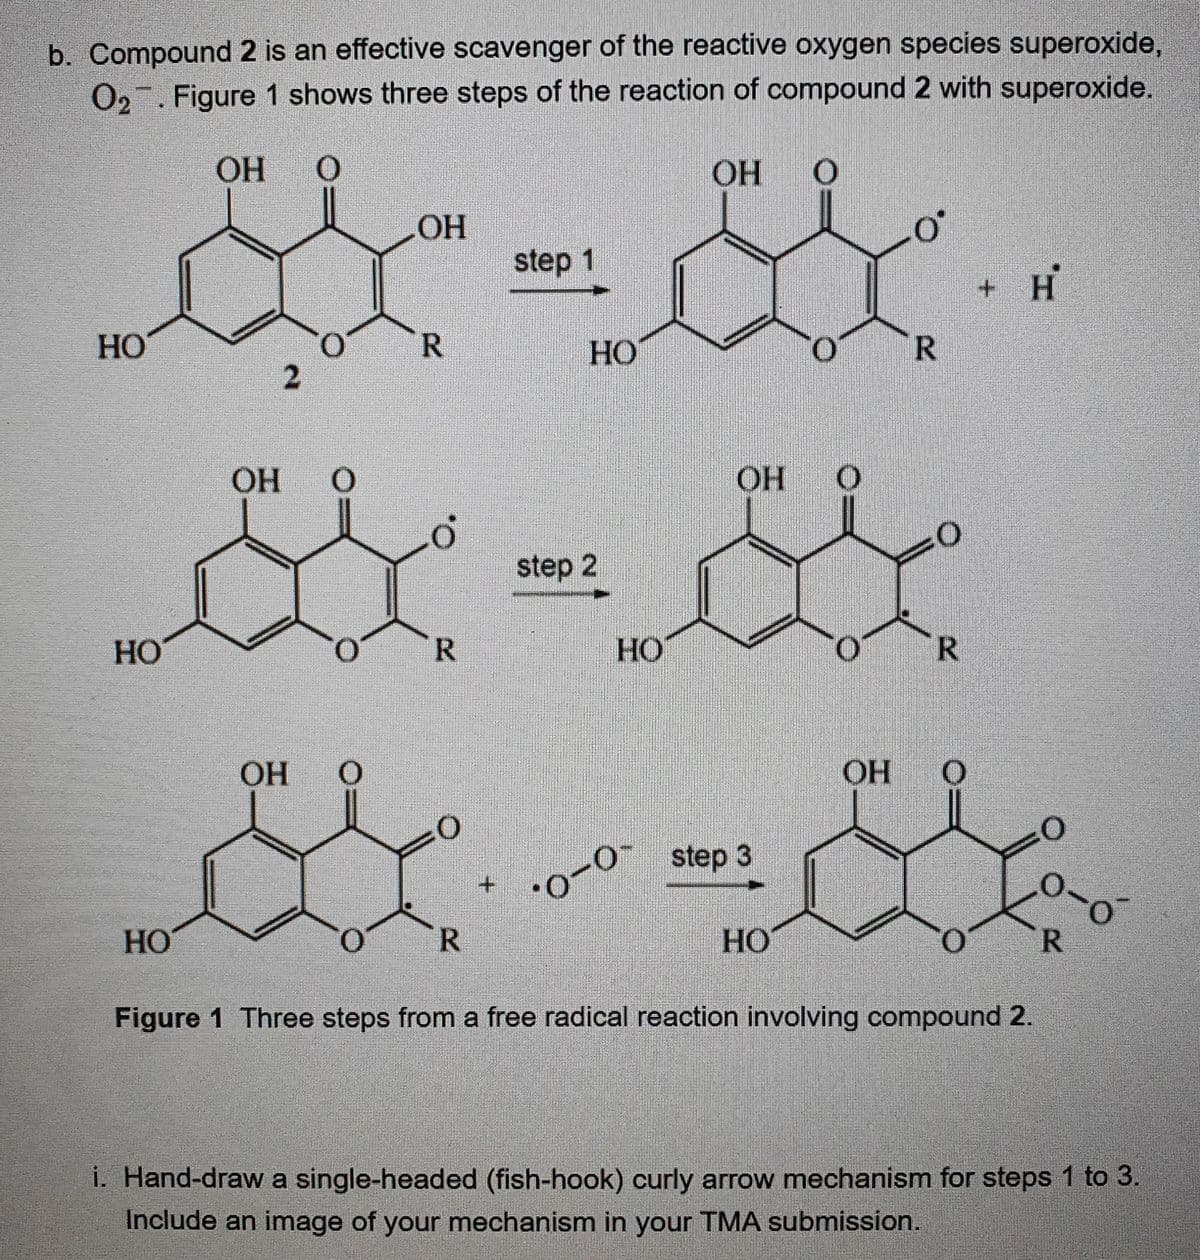 b. Compound 2 is an effective scavenger of the reactive oxygen species superoxide,
O2 " . Figure 1 shows three steps of the reaction of compound 2 with superoxide.
بل بل
مت بنز
HO
HO
OH 0
OH
OH
OH
0
R
R
step 1
R
HO
step 2
HO
OH
0-0
OH
بلا بلا
step 3
HO
R
OH
R
+ H
HO
Figure 1 Three steps from a free radical reaction involving compound 2.
۱-۵
R
i. Hand-draw a single-headed (fish-hook) curly arrow mechanism for steps 1 to 3.
Include an image of your mechanism in your TMA submission.